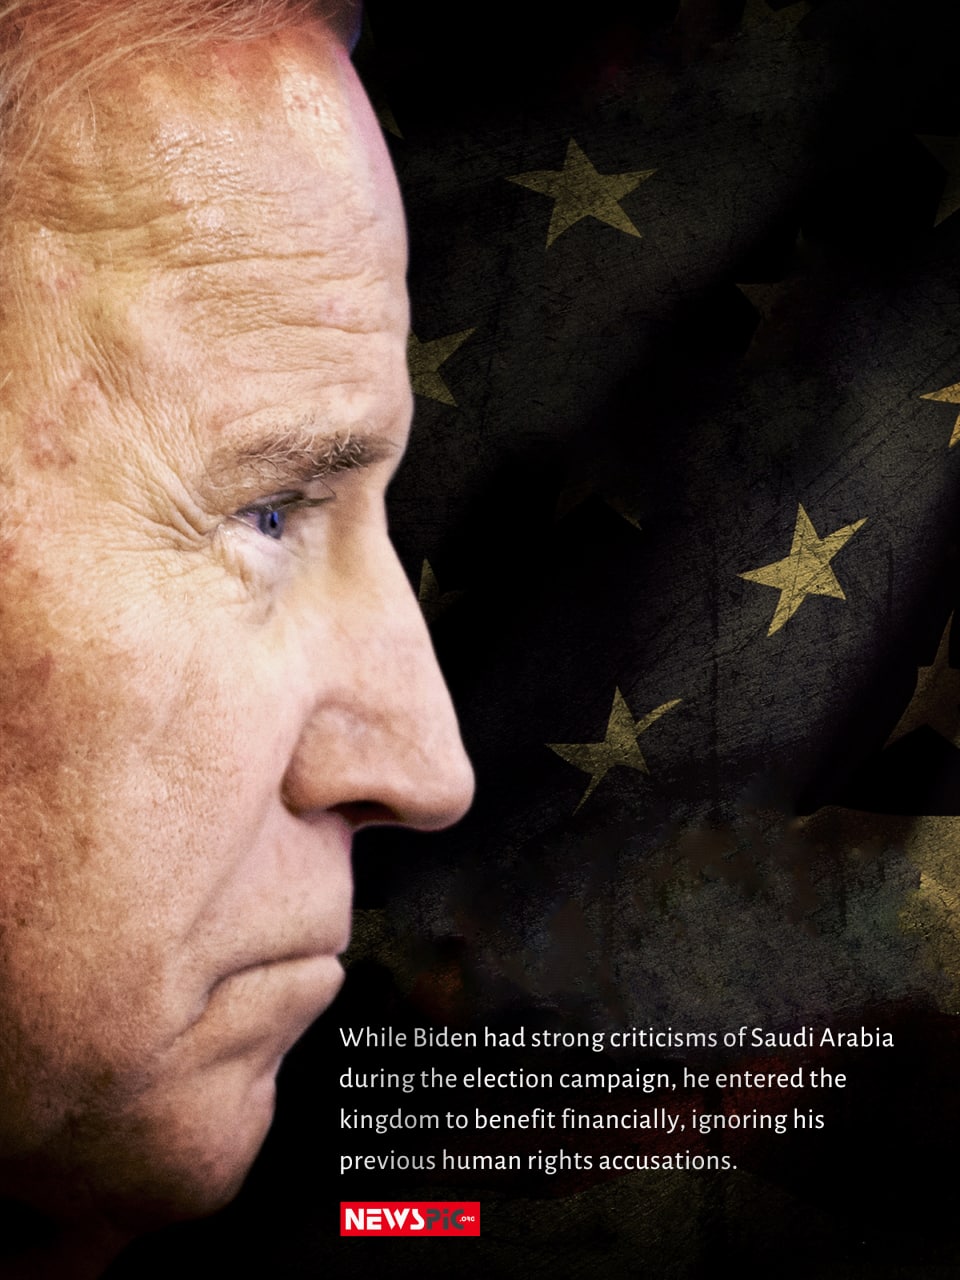 while Biden had strong criticisms of Saudi Arabia during the election campaign he entered kingdom to benefit financially